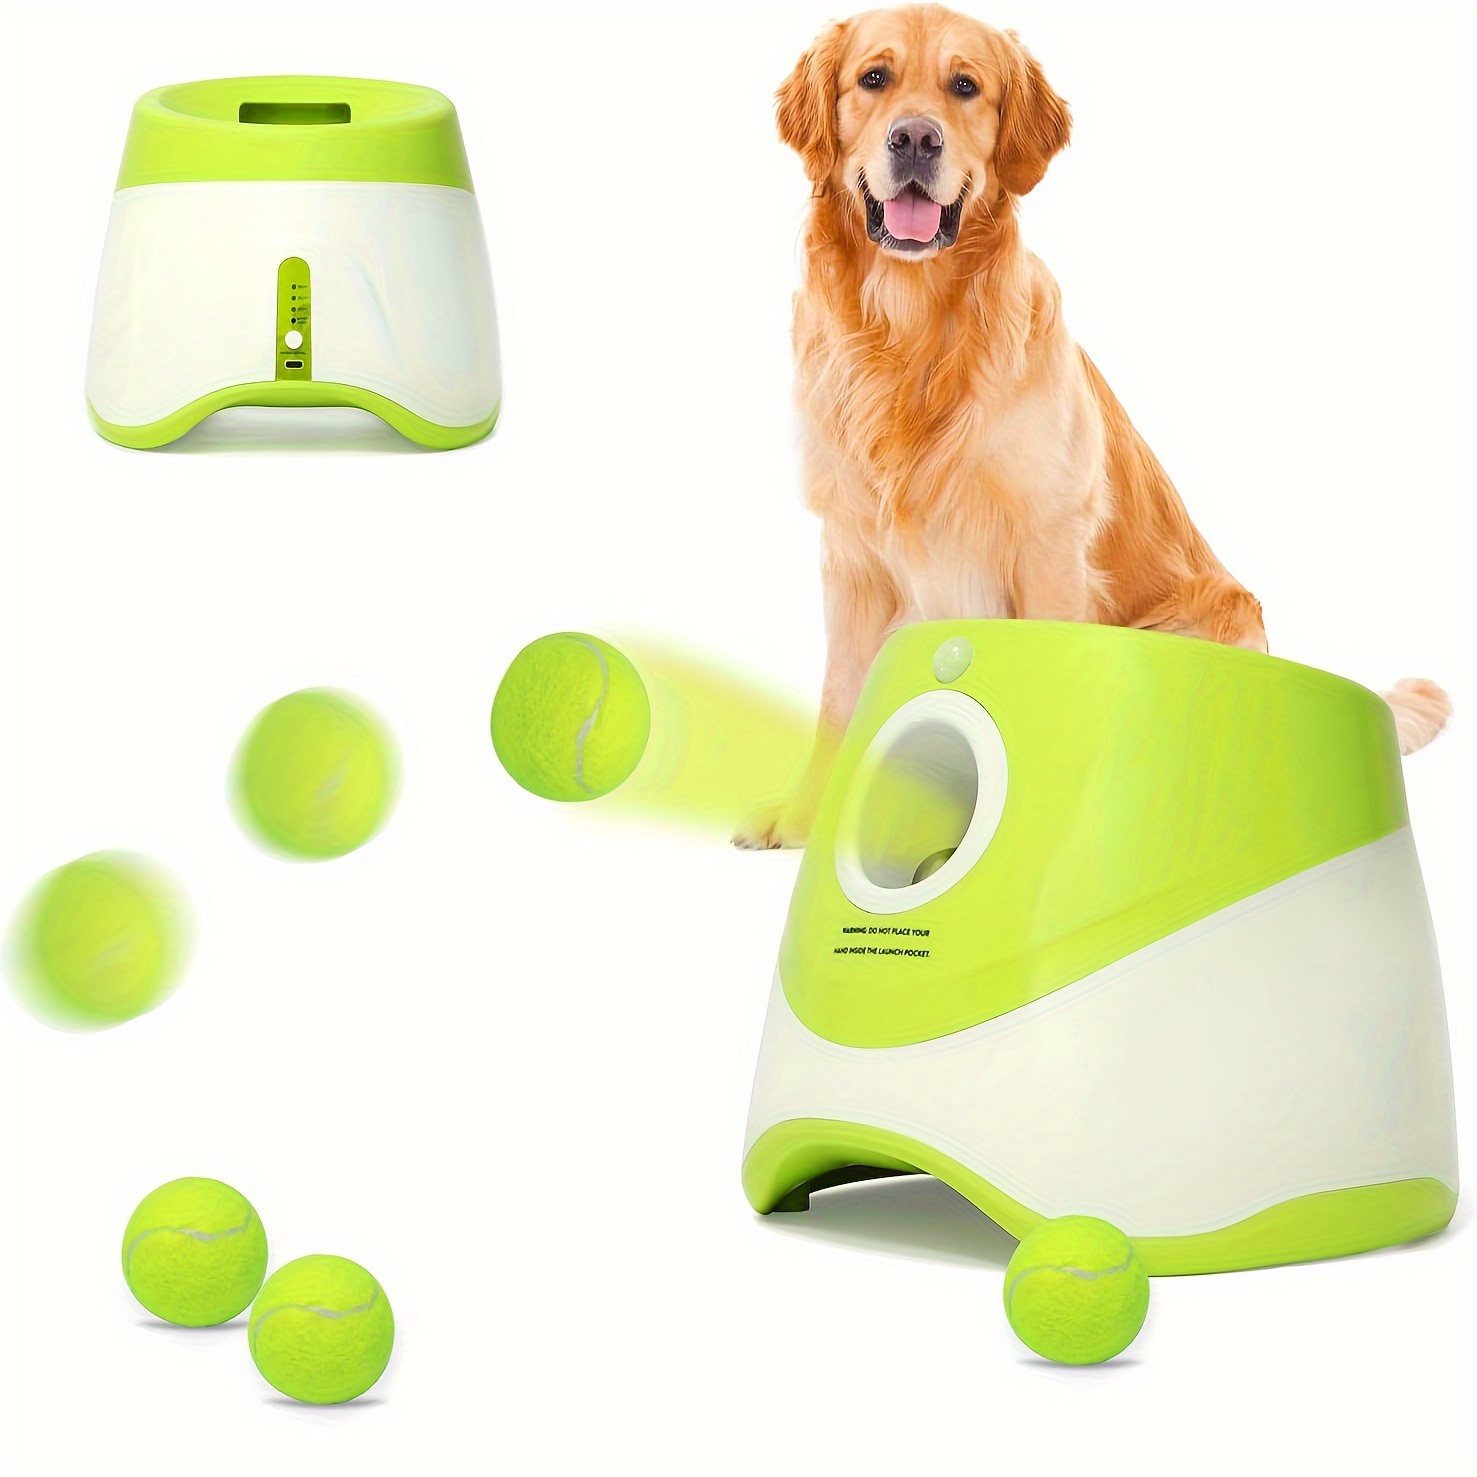 

Interactive Dog Ball Launcher - Usb Rechargeable, Automatic Tennis Thrower With 3 Balls For Outdoor Play